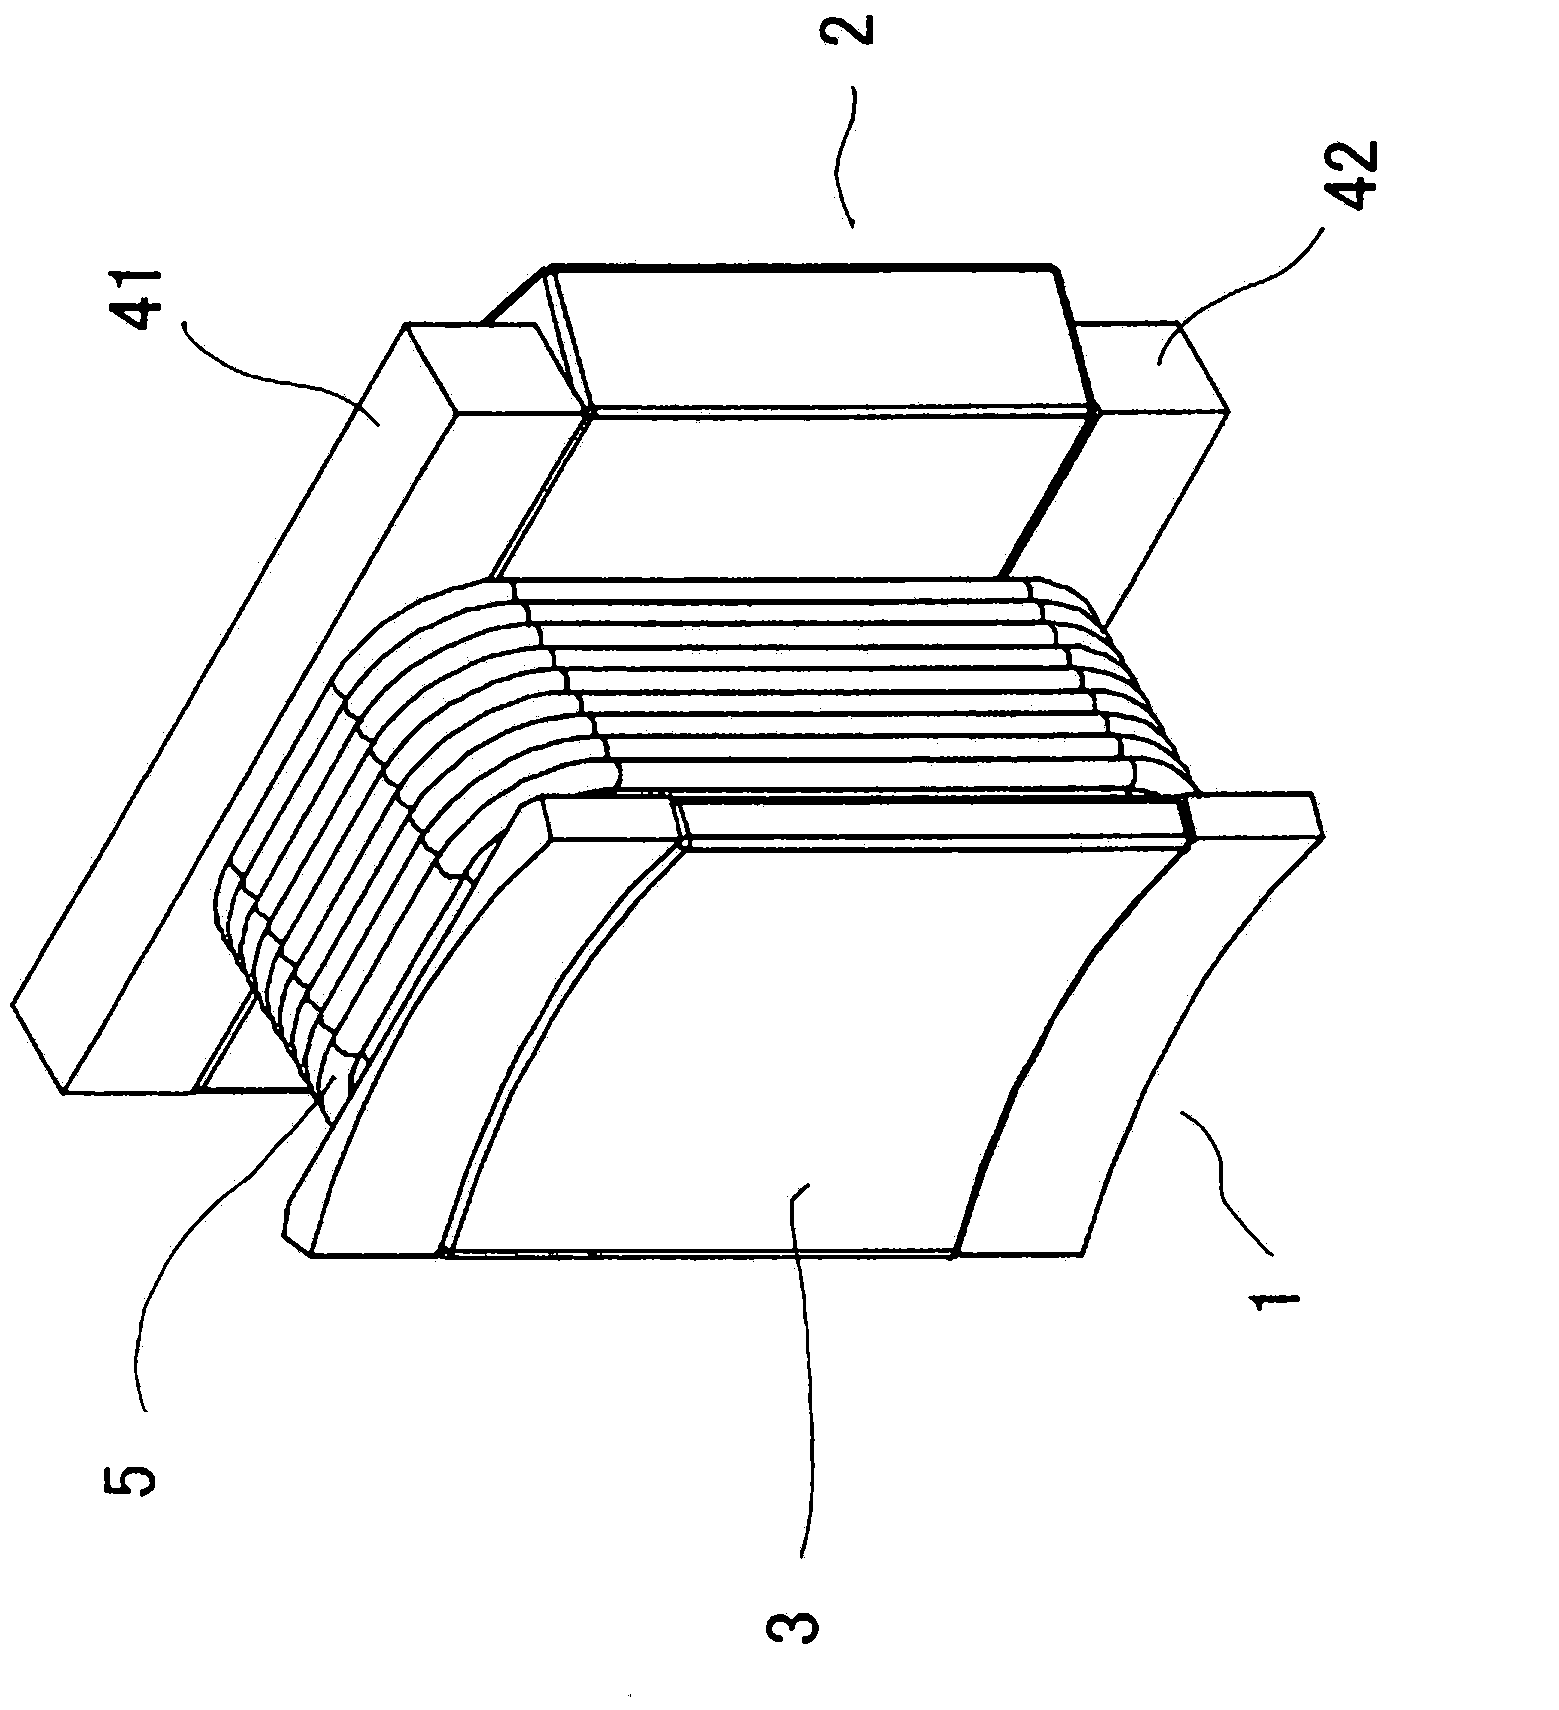 Stator for rotating electrical machine, and method for producing same